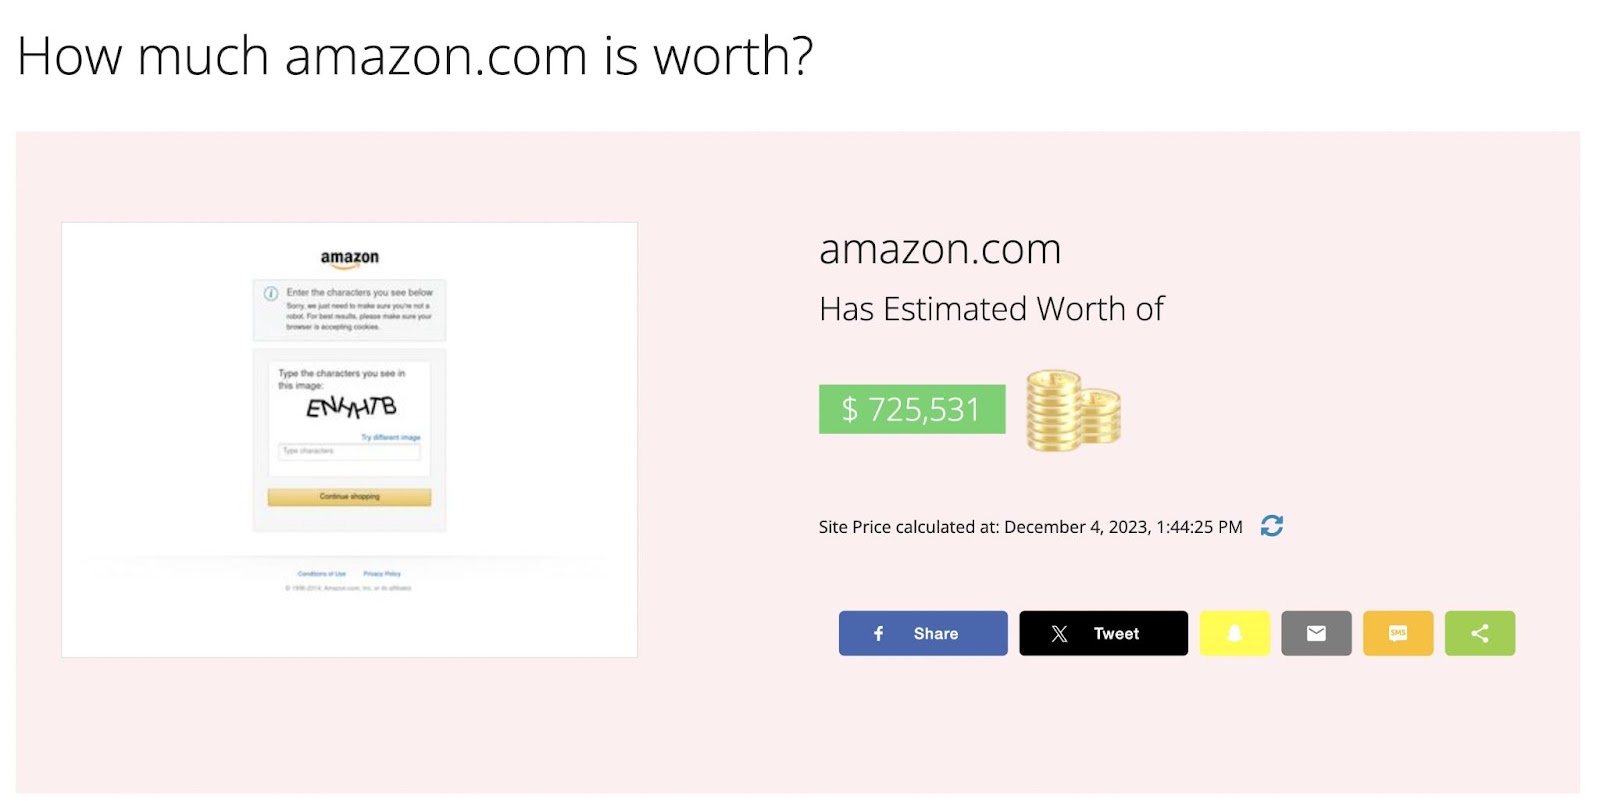 "How much is amazon.com worth?" results in Trysiteprice